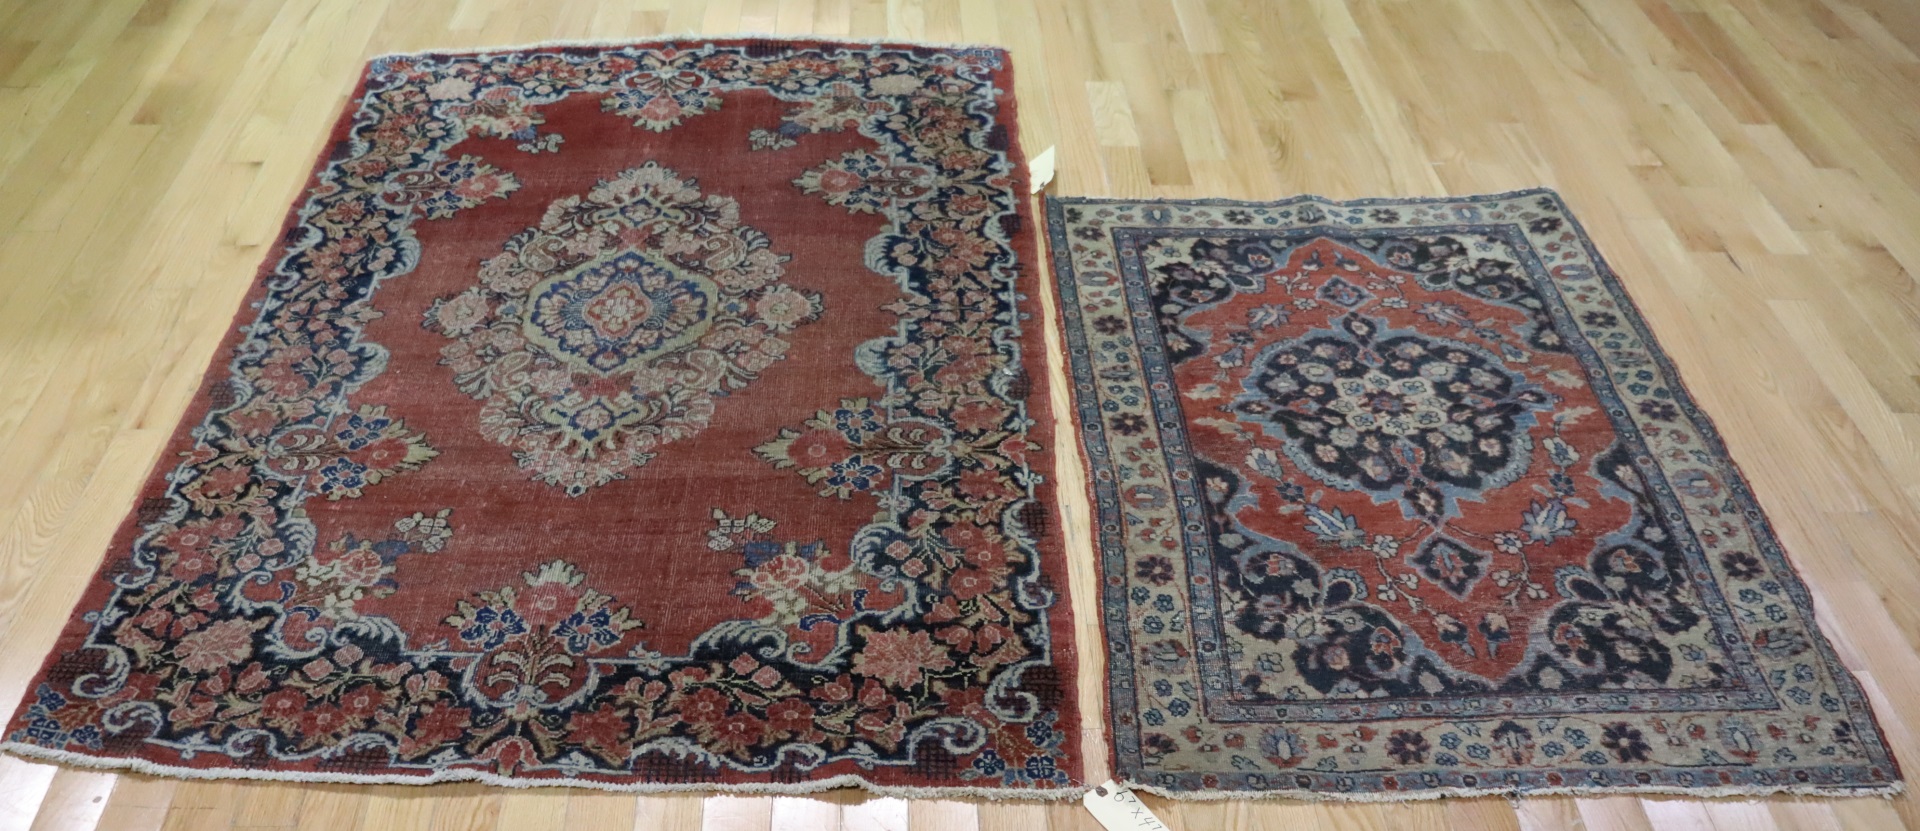 2 ANTIQUE AND FINELY HAND WOVEN 3be3a7